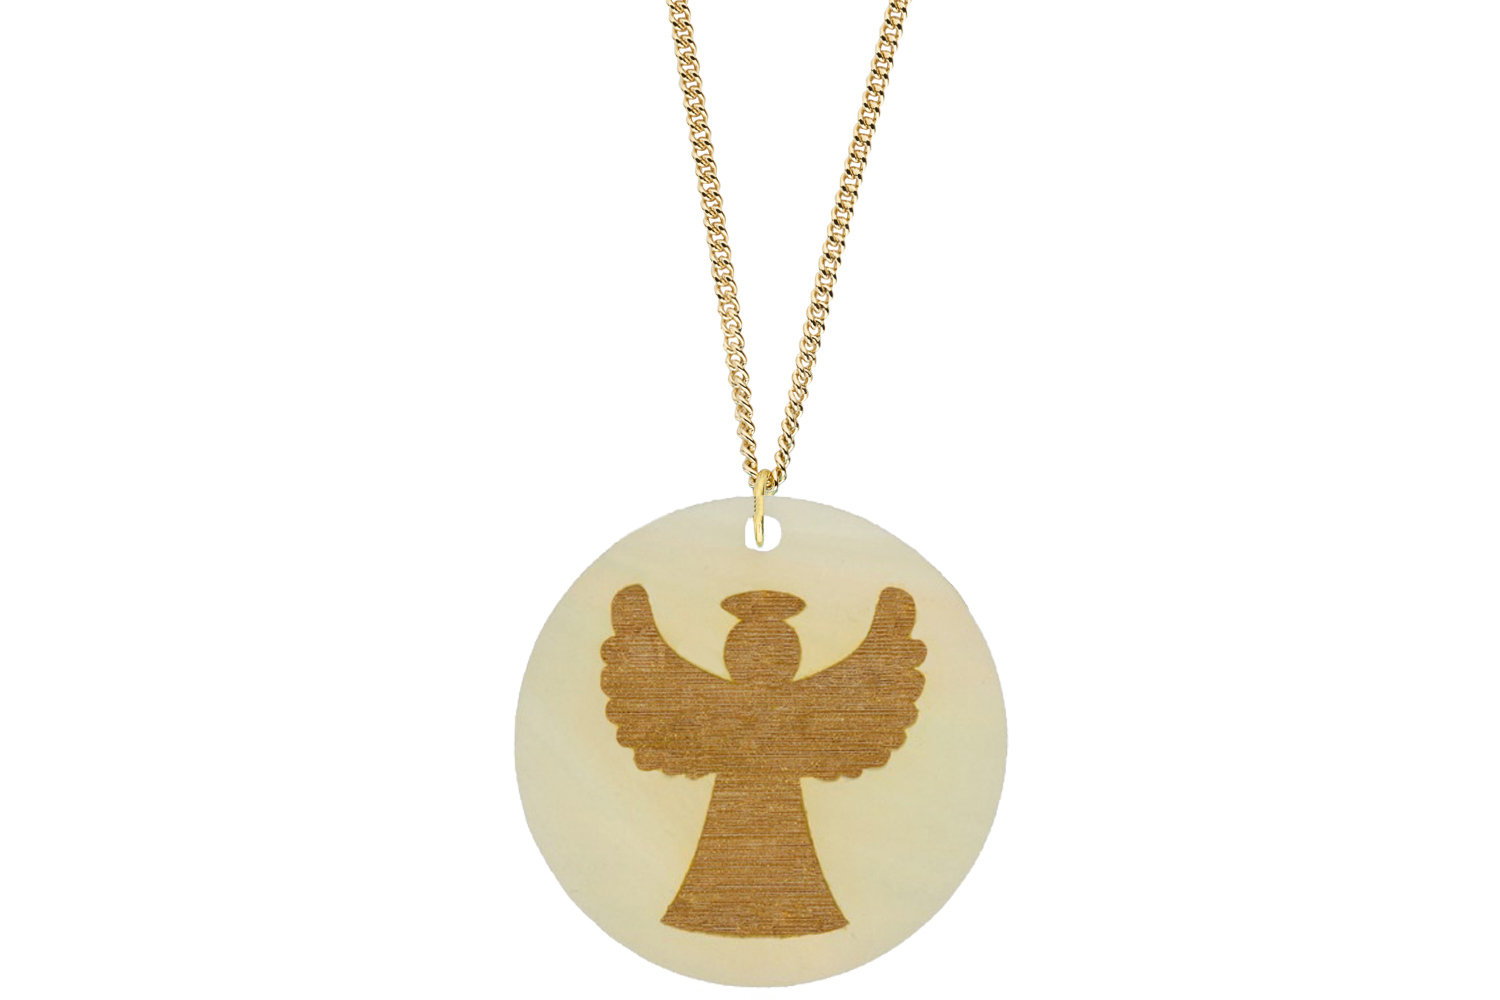 Angel Pendant Subtle Style Refined with Paint on Chain Necklace